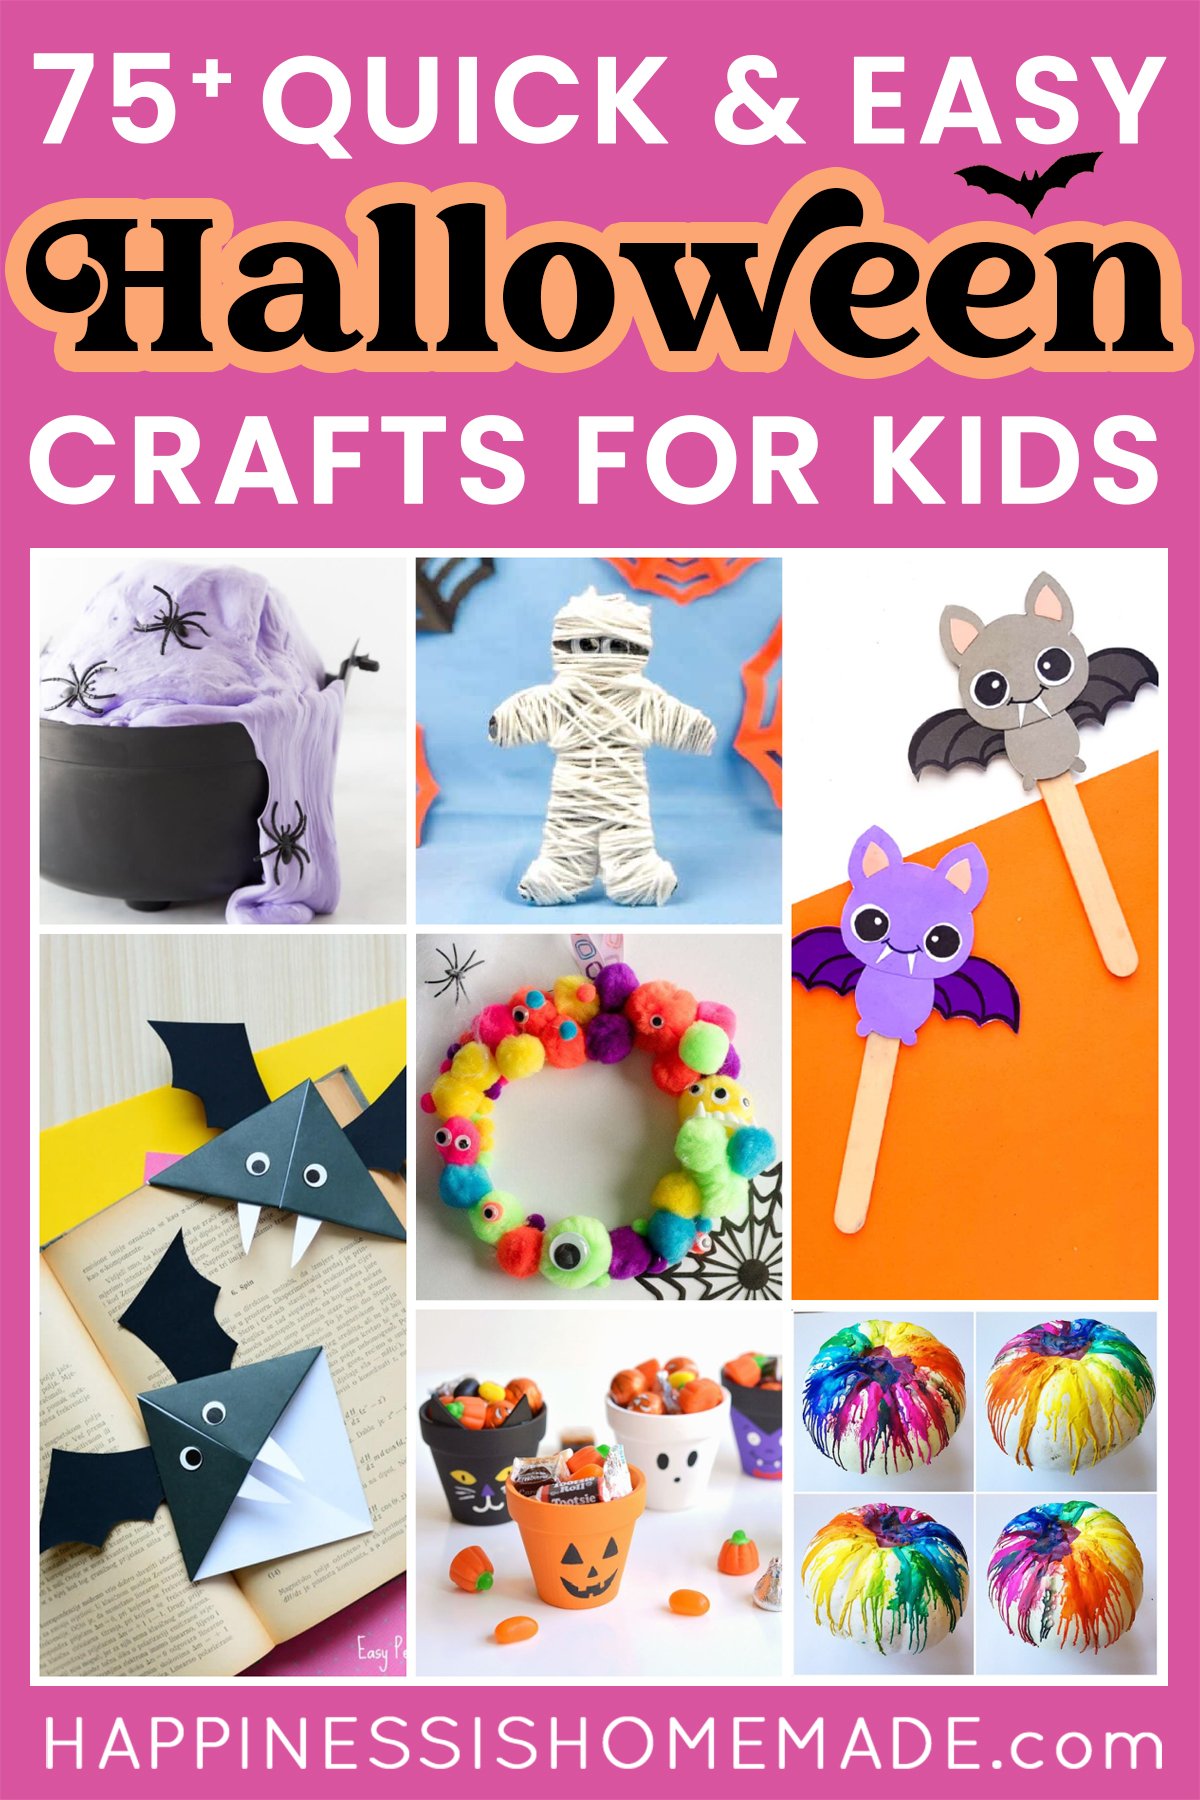 Graphic with Text "75+ Quick and Easy Halloween Crafts for Kids" with collage of nine Halloween craft ideas